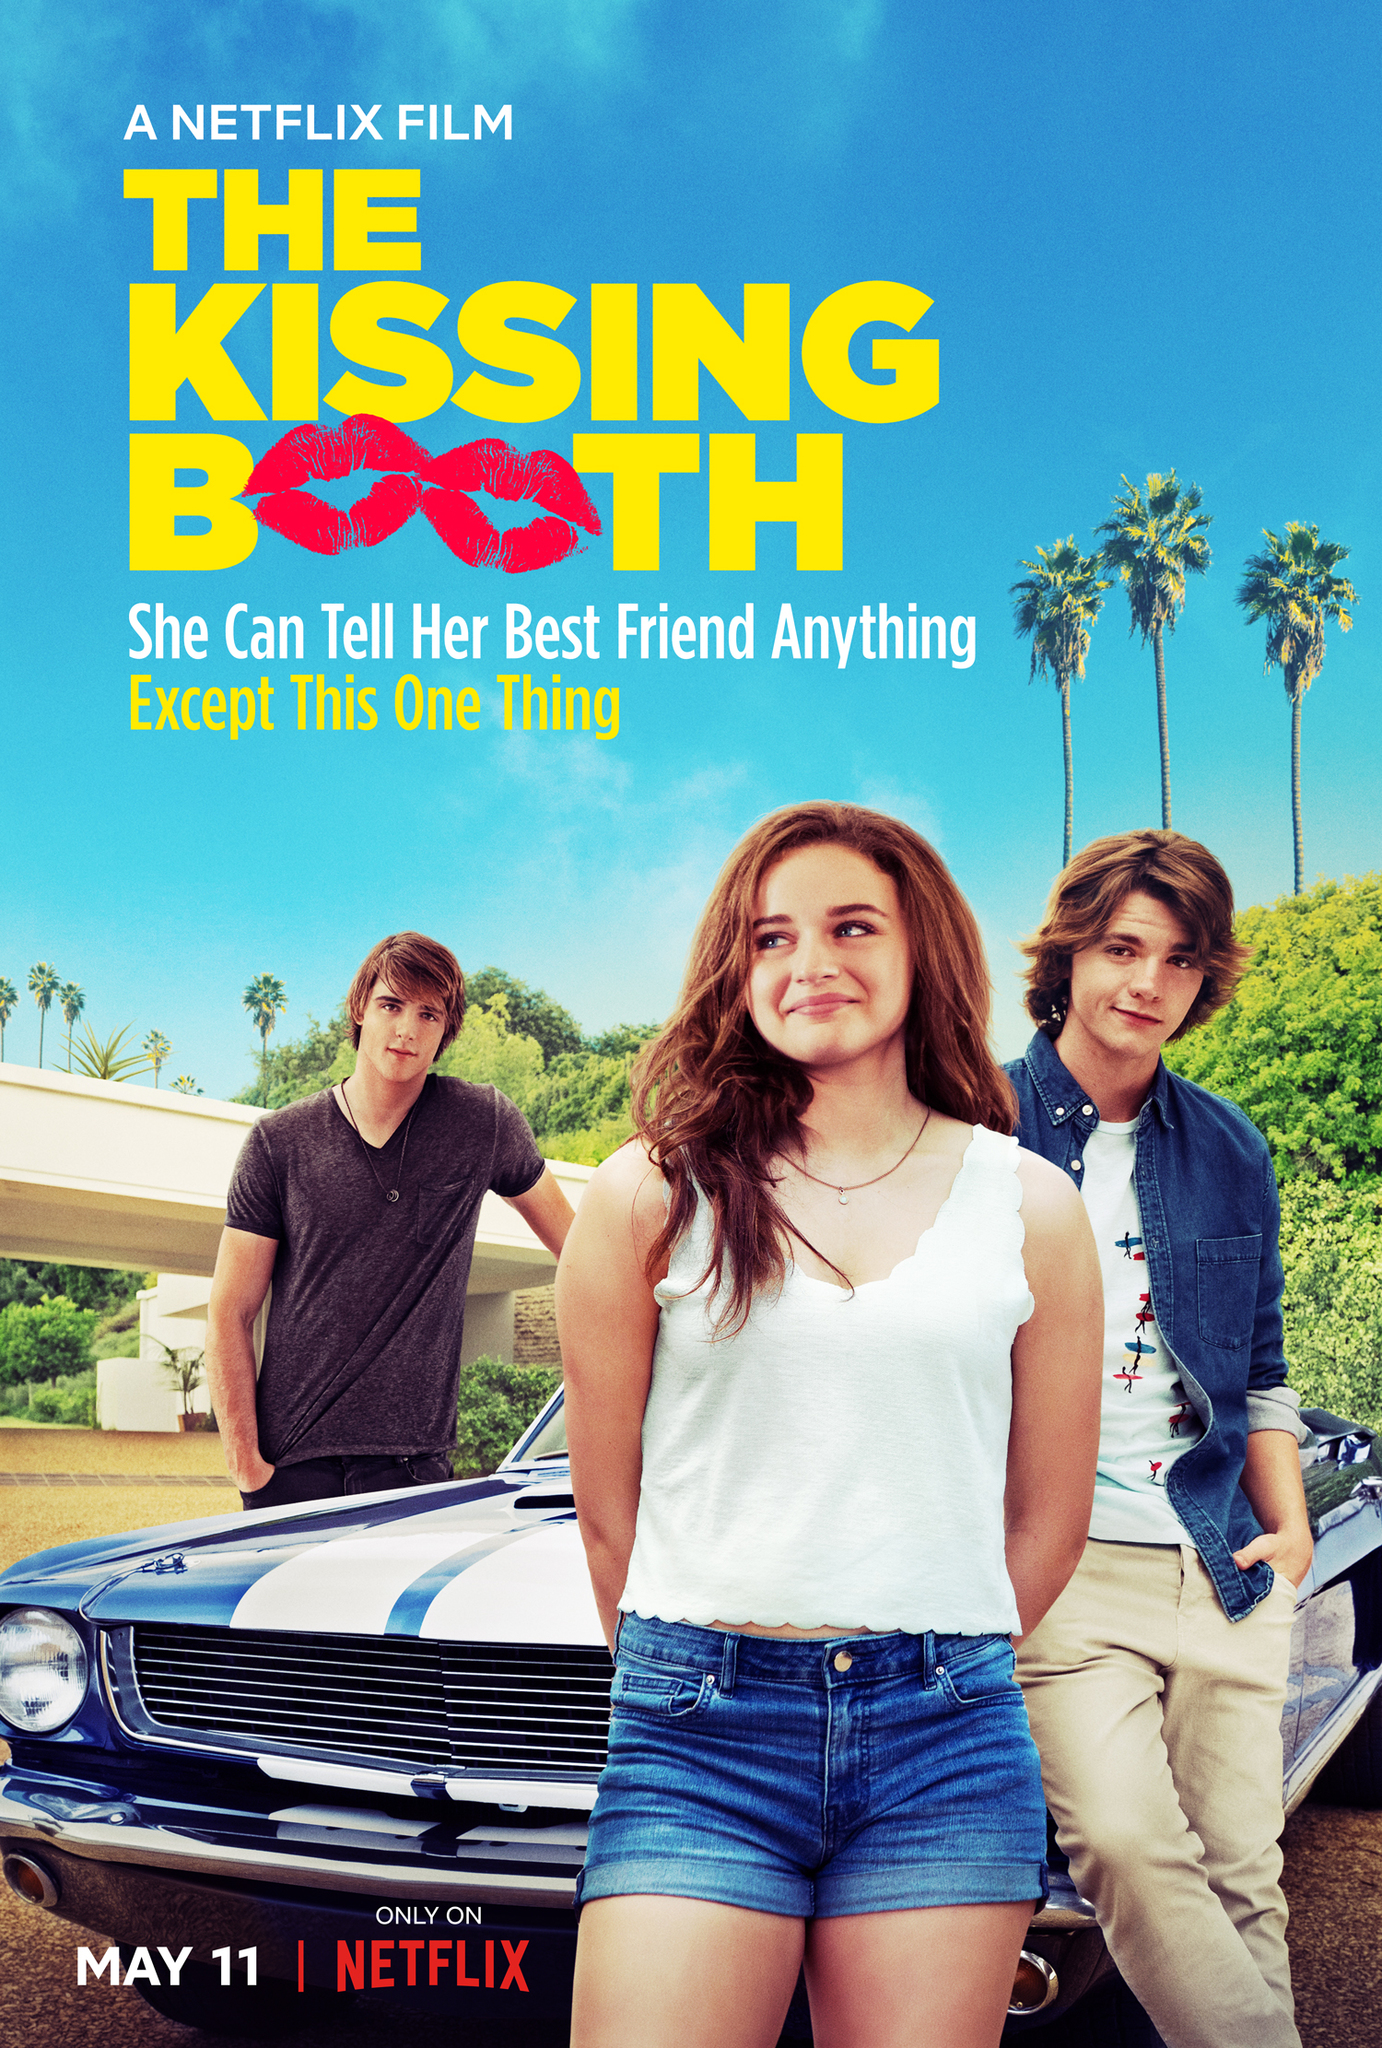 the kissing booth poster.jpg